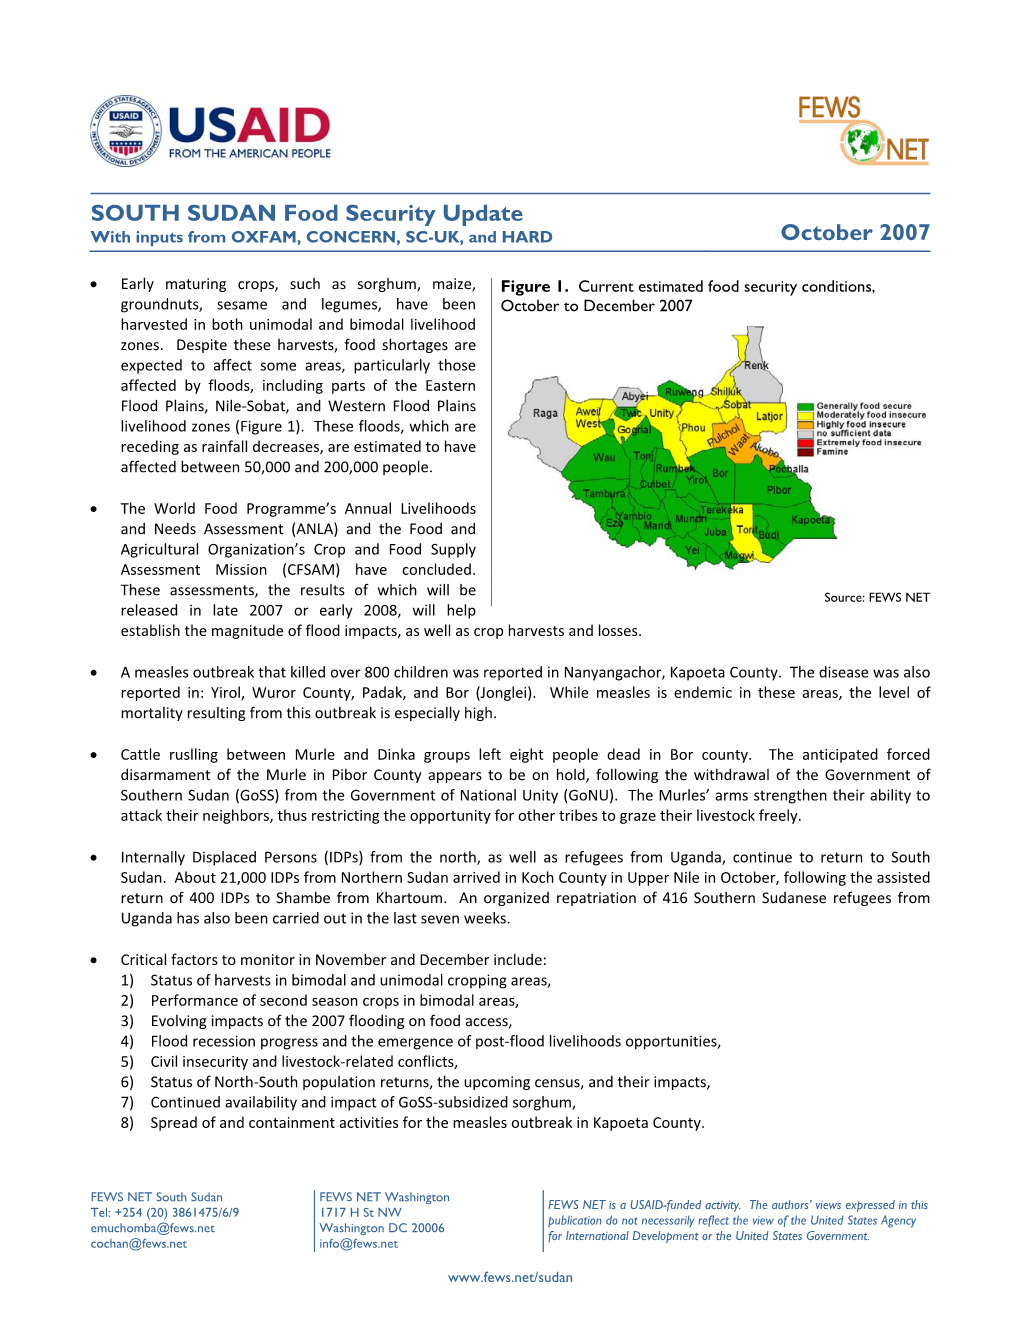 South Sudan Food Security Update with Inputs from Concern, OXFAM